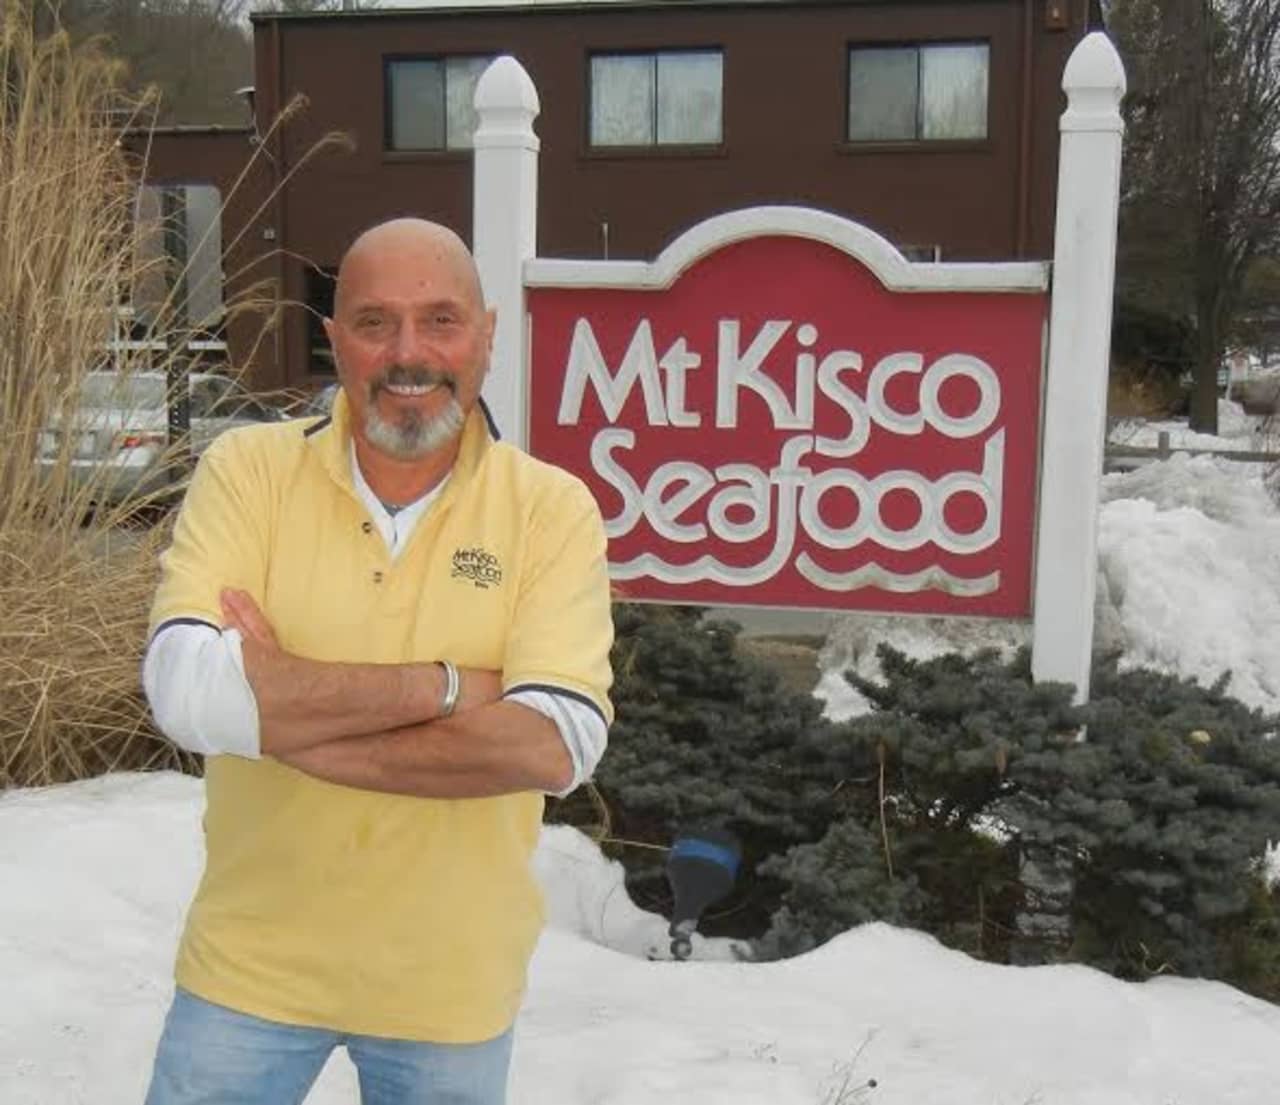 The Mount Kisco Chamber of Commerce has named Joe DiMauro, owner and operator of Mount Kisco Seafood as 2014 Citizen of the Year. 